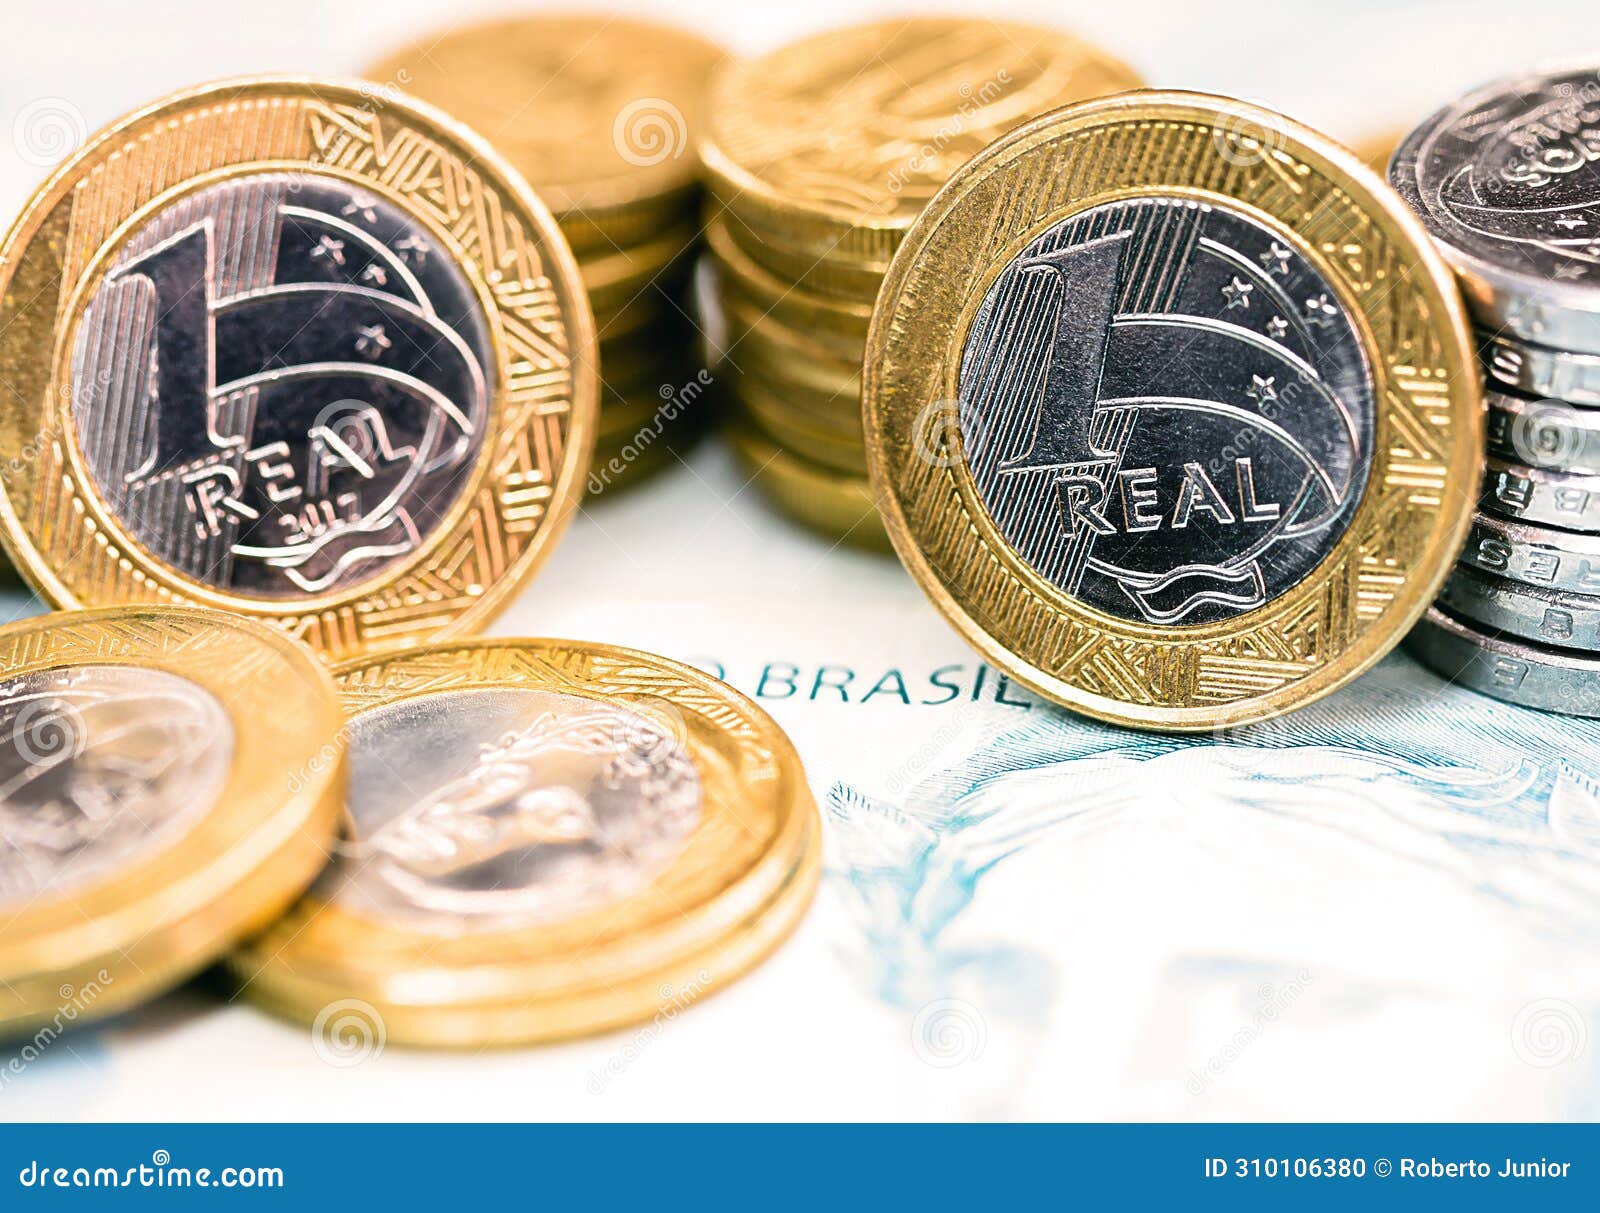 brazilian real coins, one real, currency of brazil, brazilian economy concept